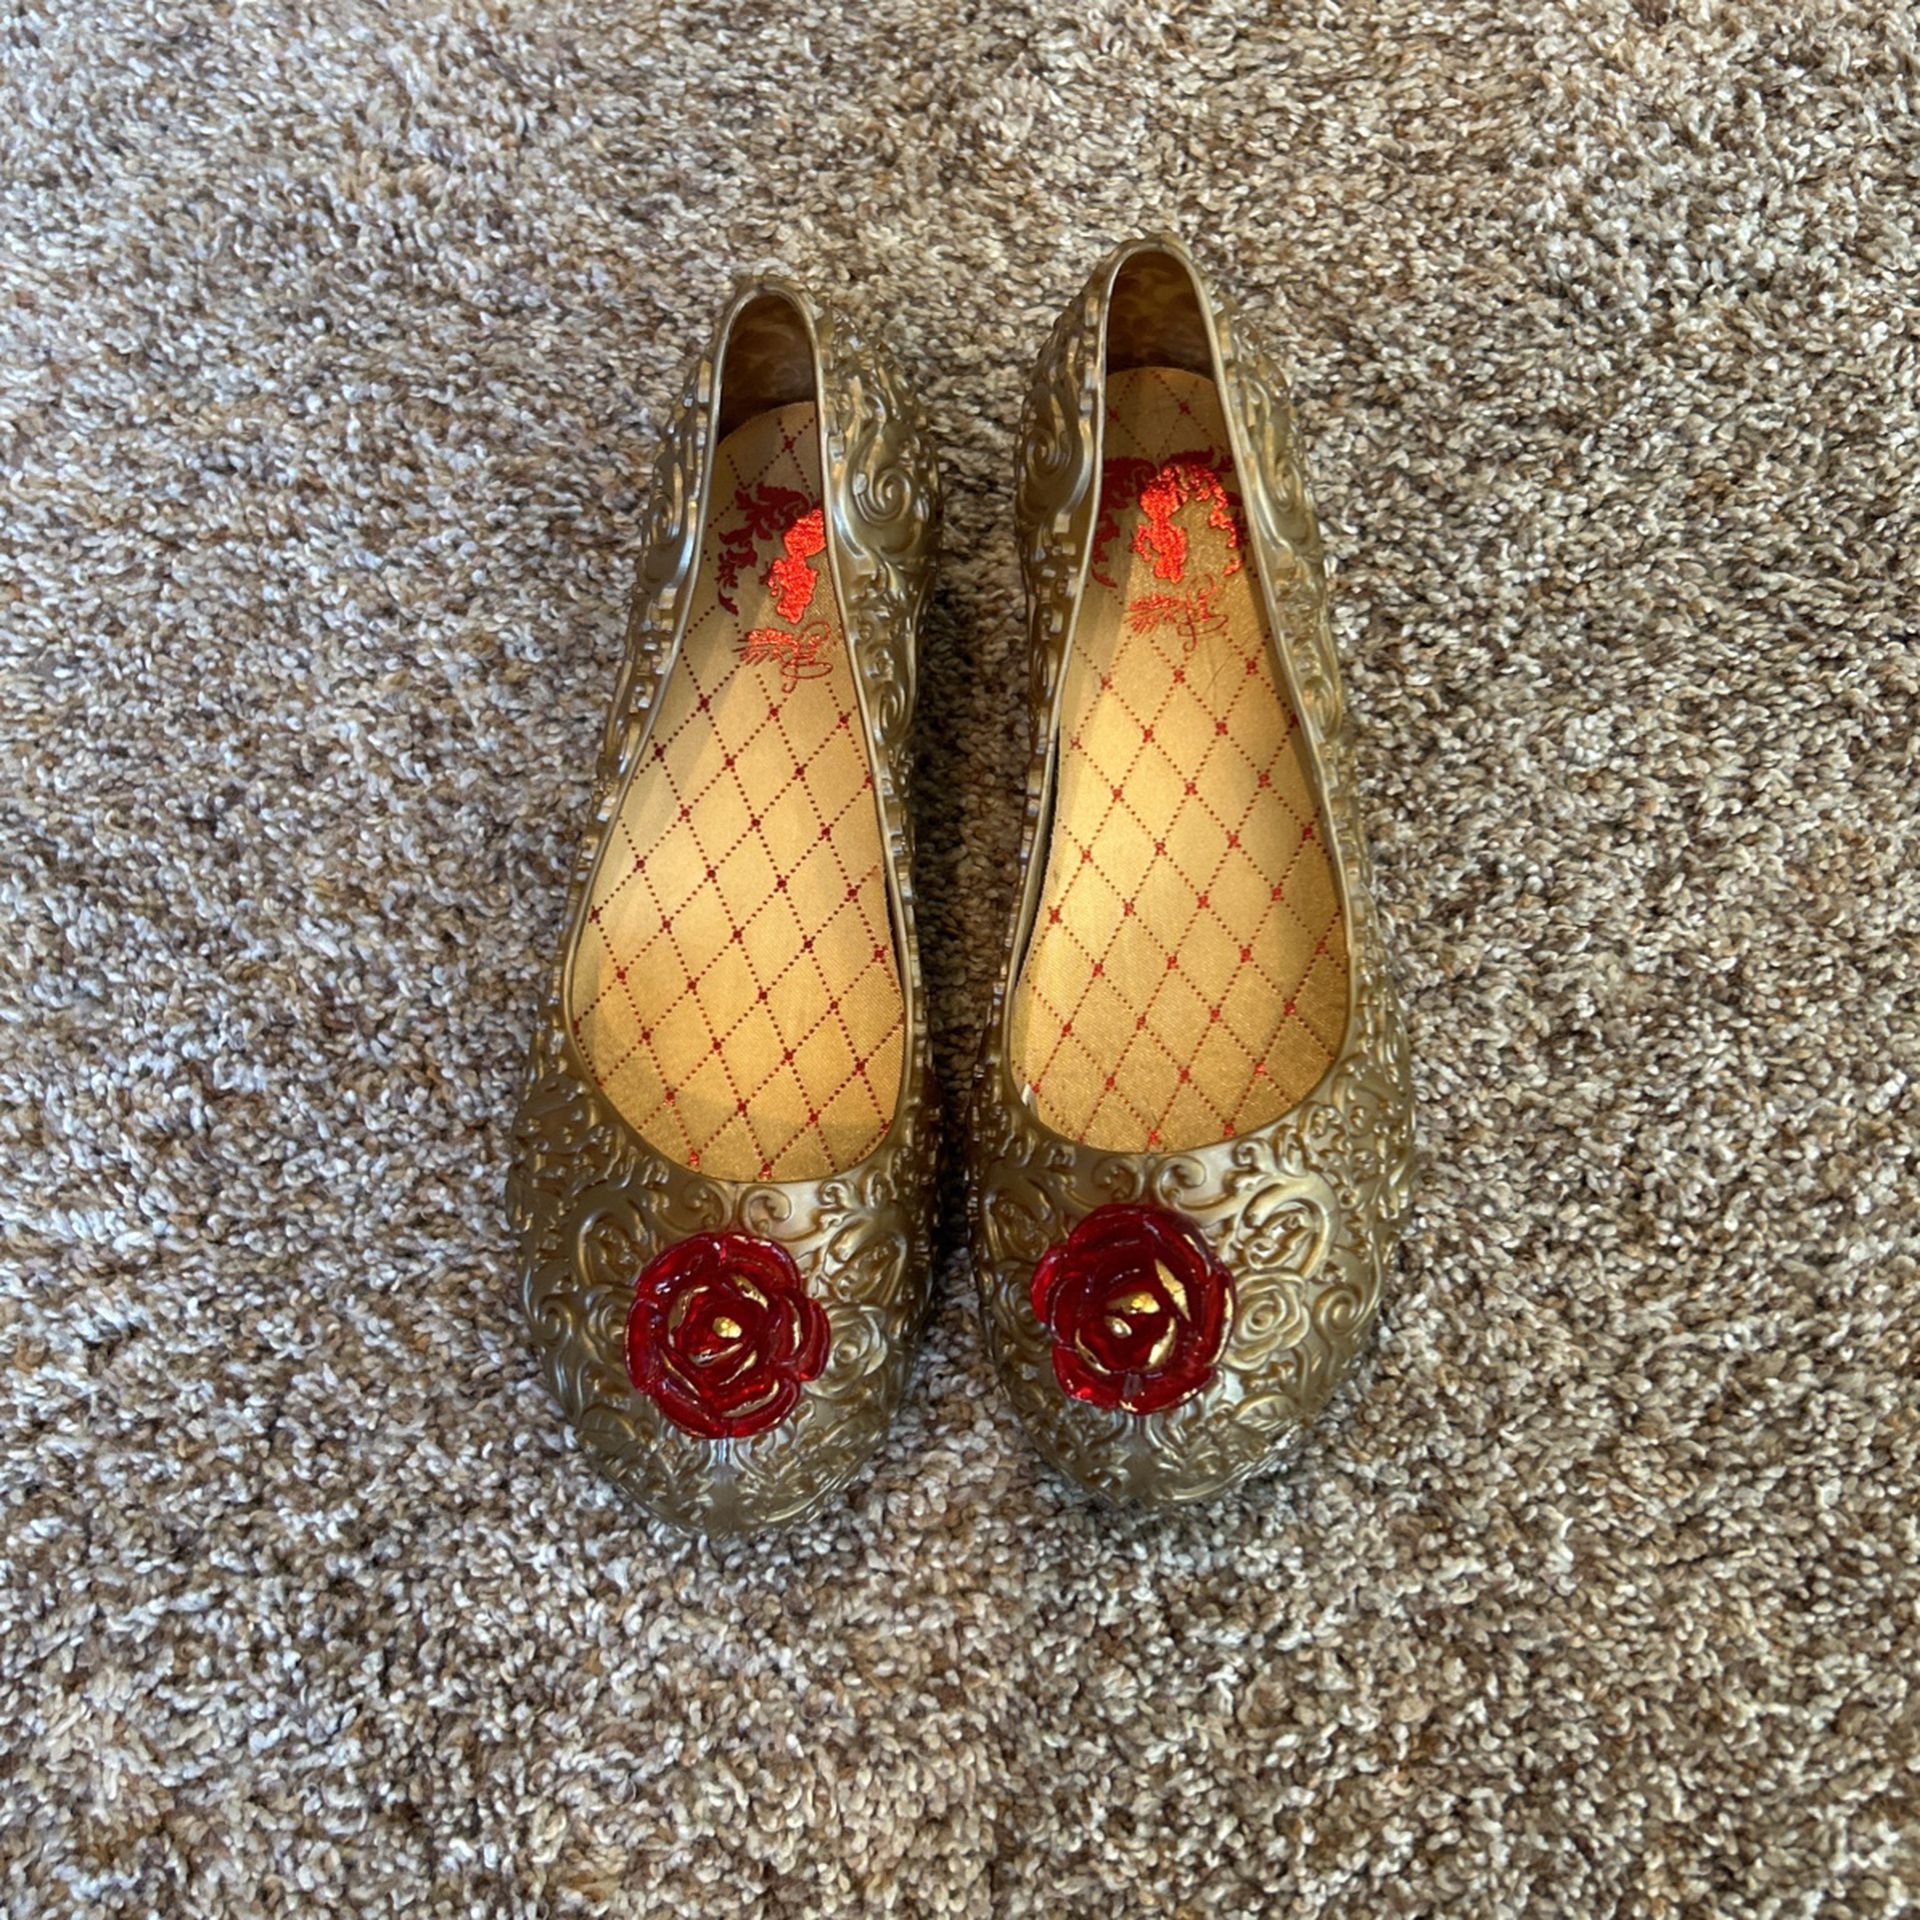 Beauty And The Beast Costume Shoes